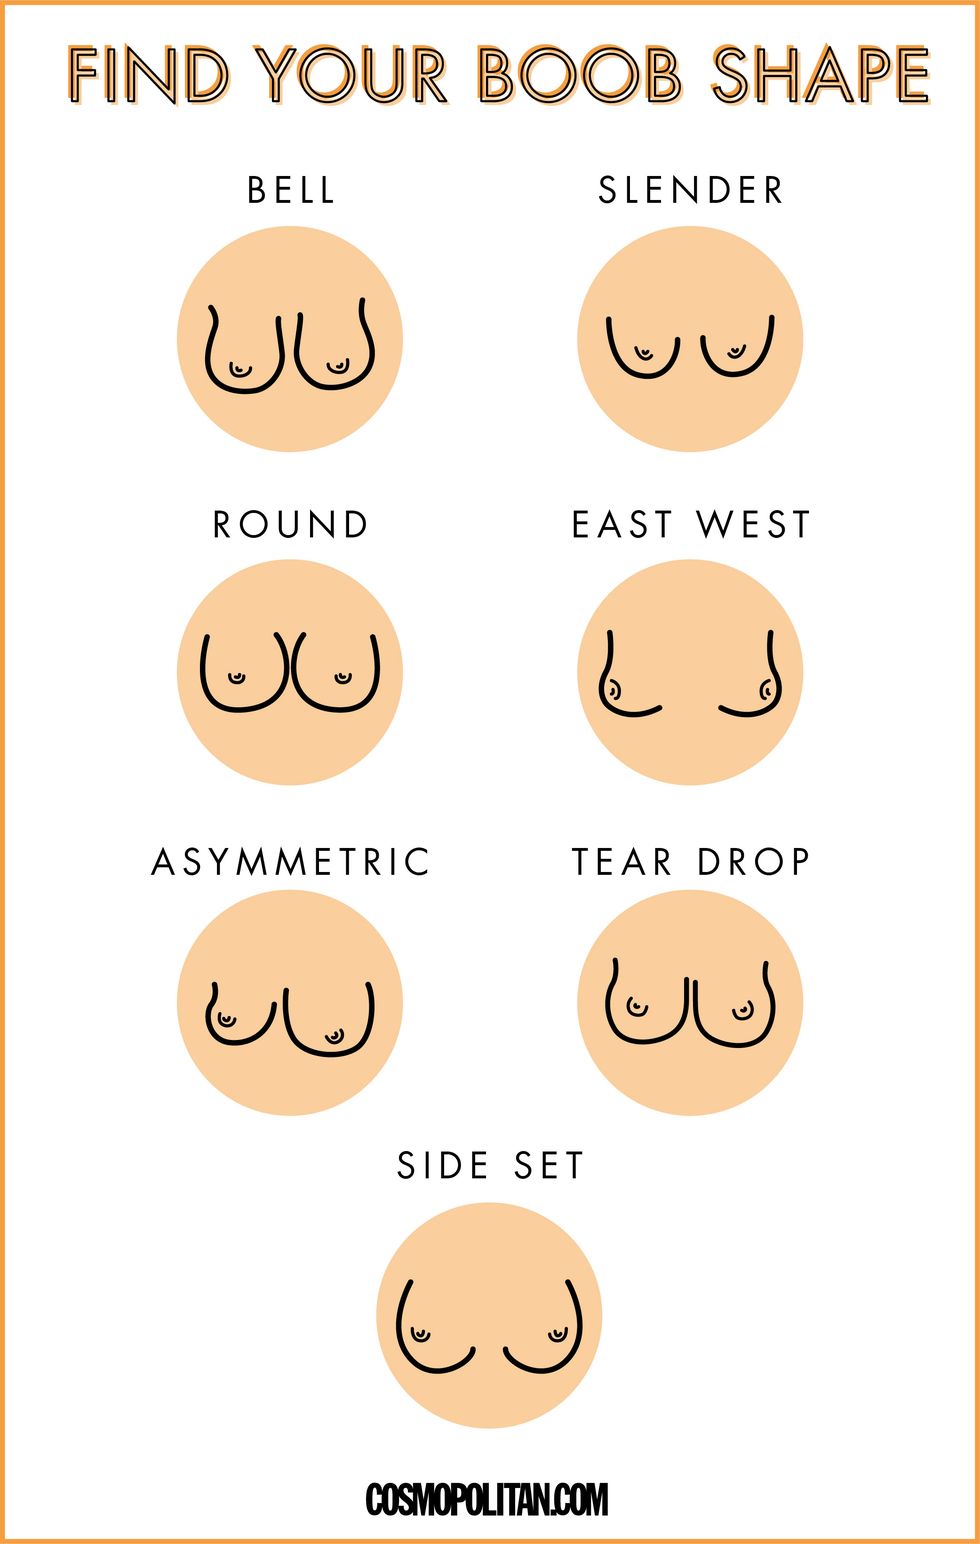 6 practical tips to choose the right bra size and type